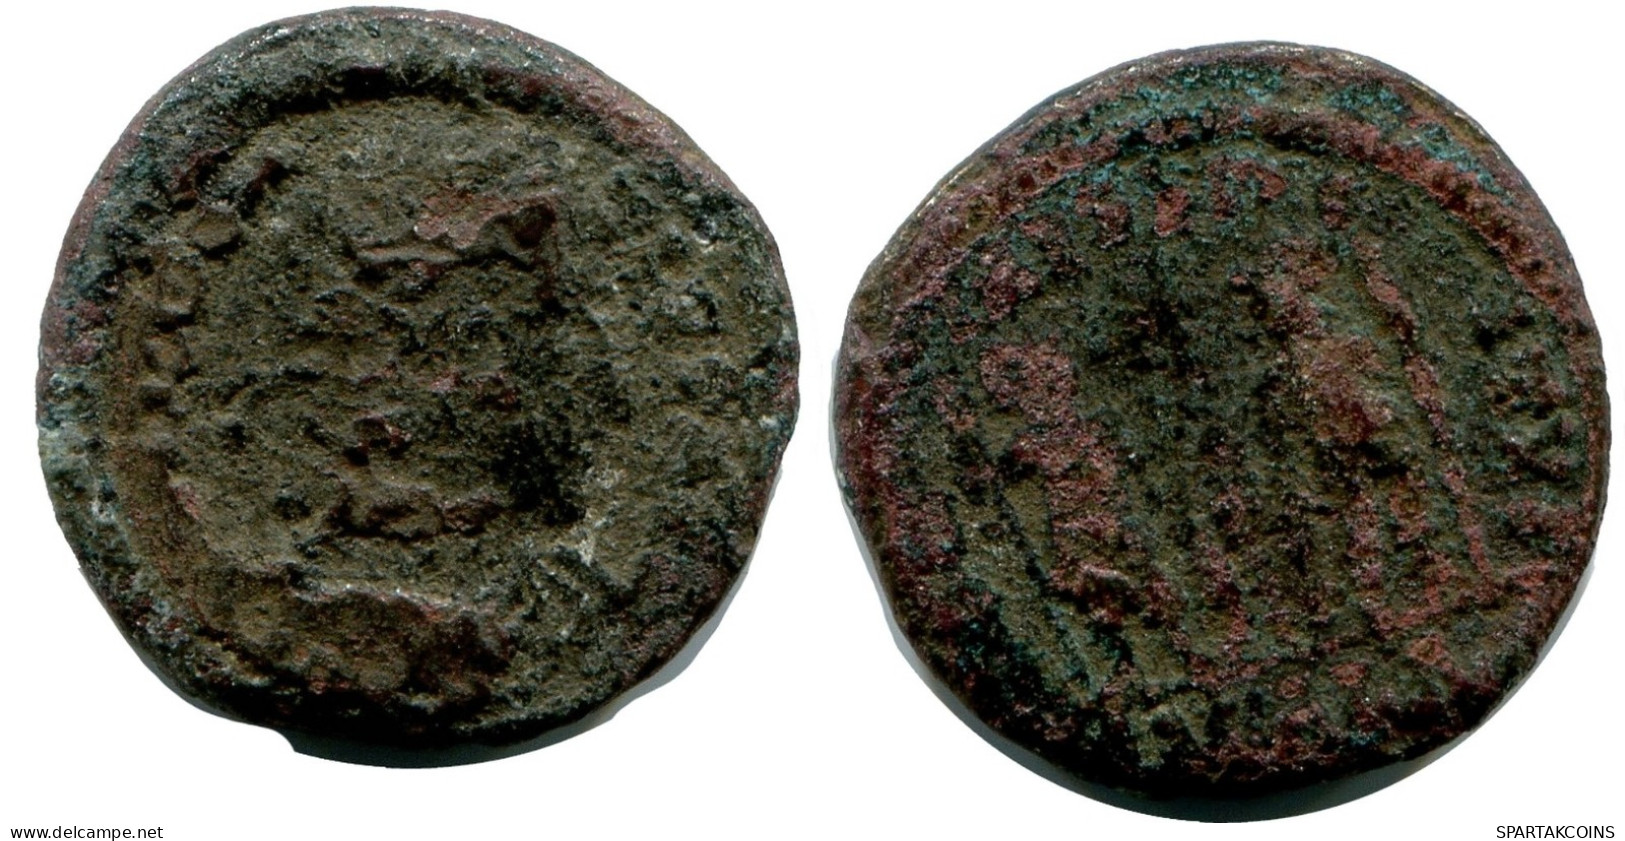 ROMAN Pièce MINTED IN ALEKSANDRIA FROM THE ROYAL ONTARIO MUSEUM #ANC10184.14.F.A - El Impero Christiano (307 / 363)